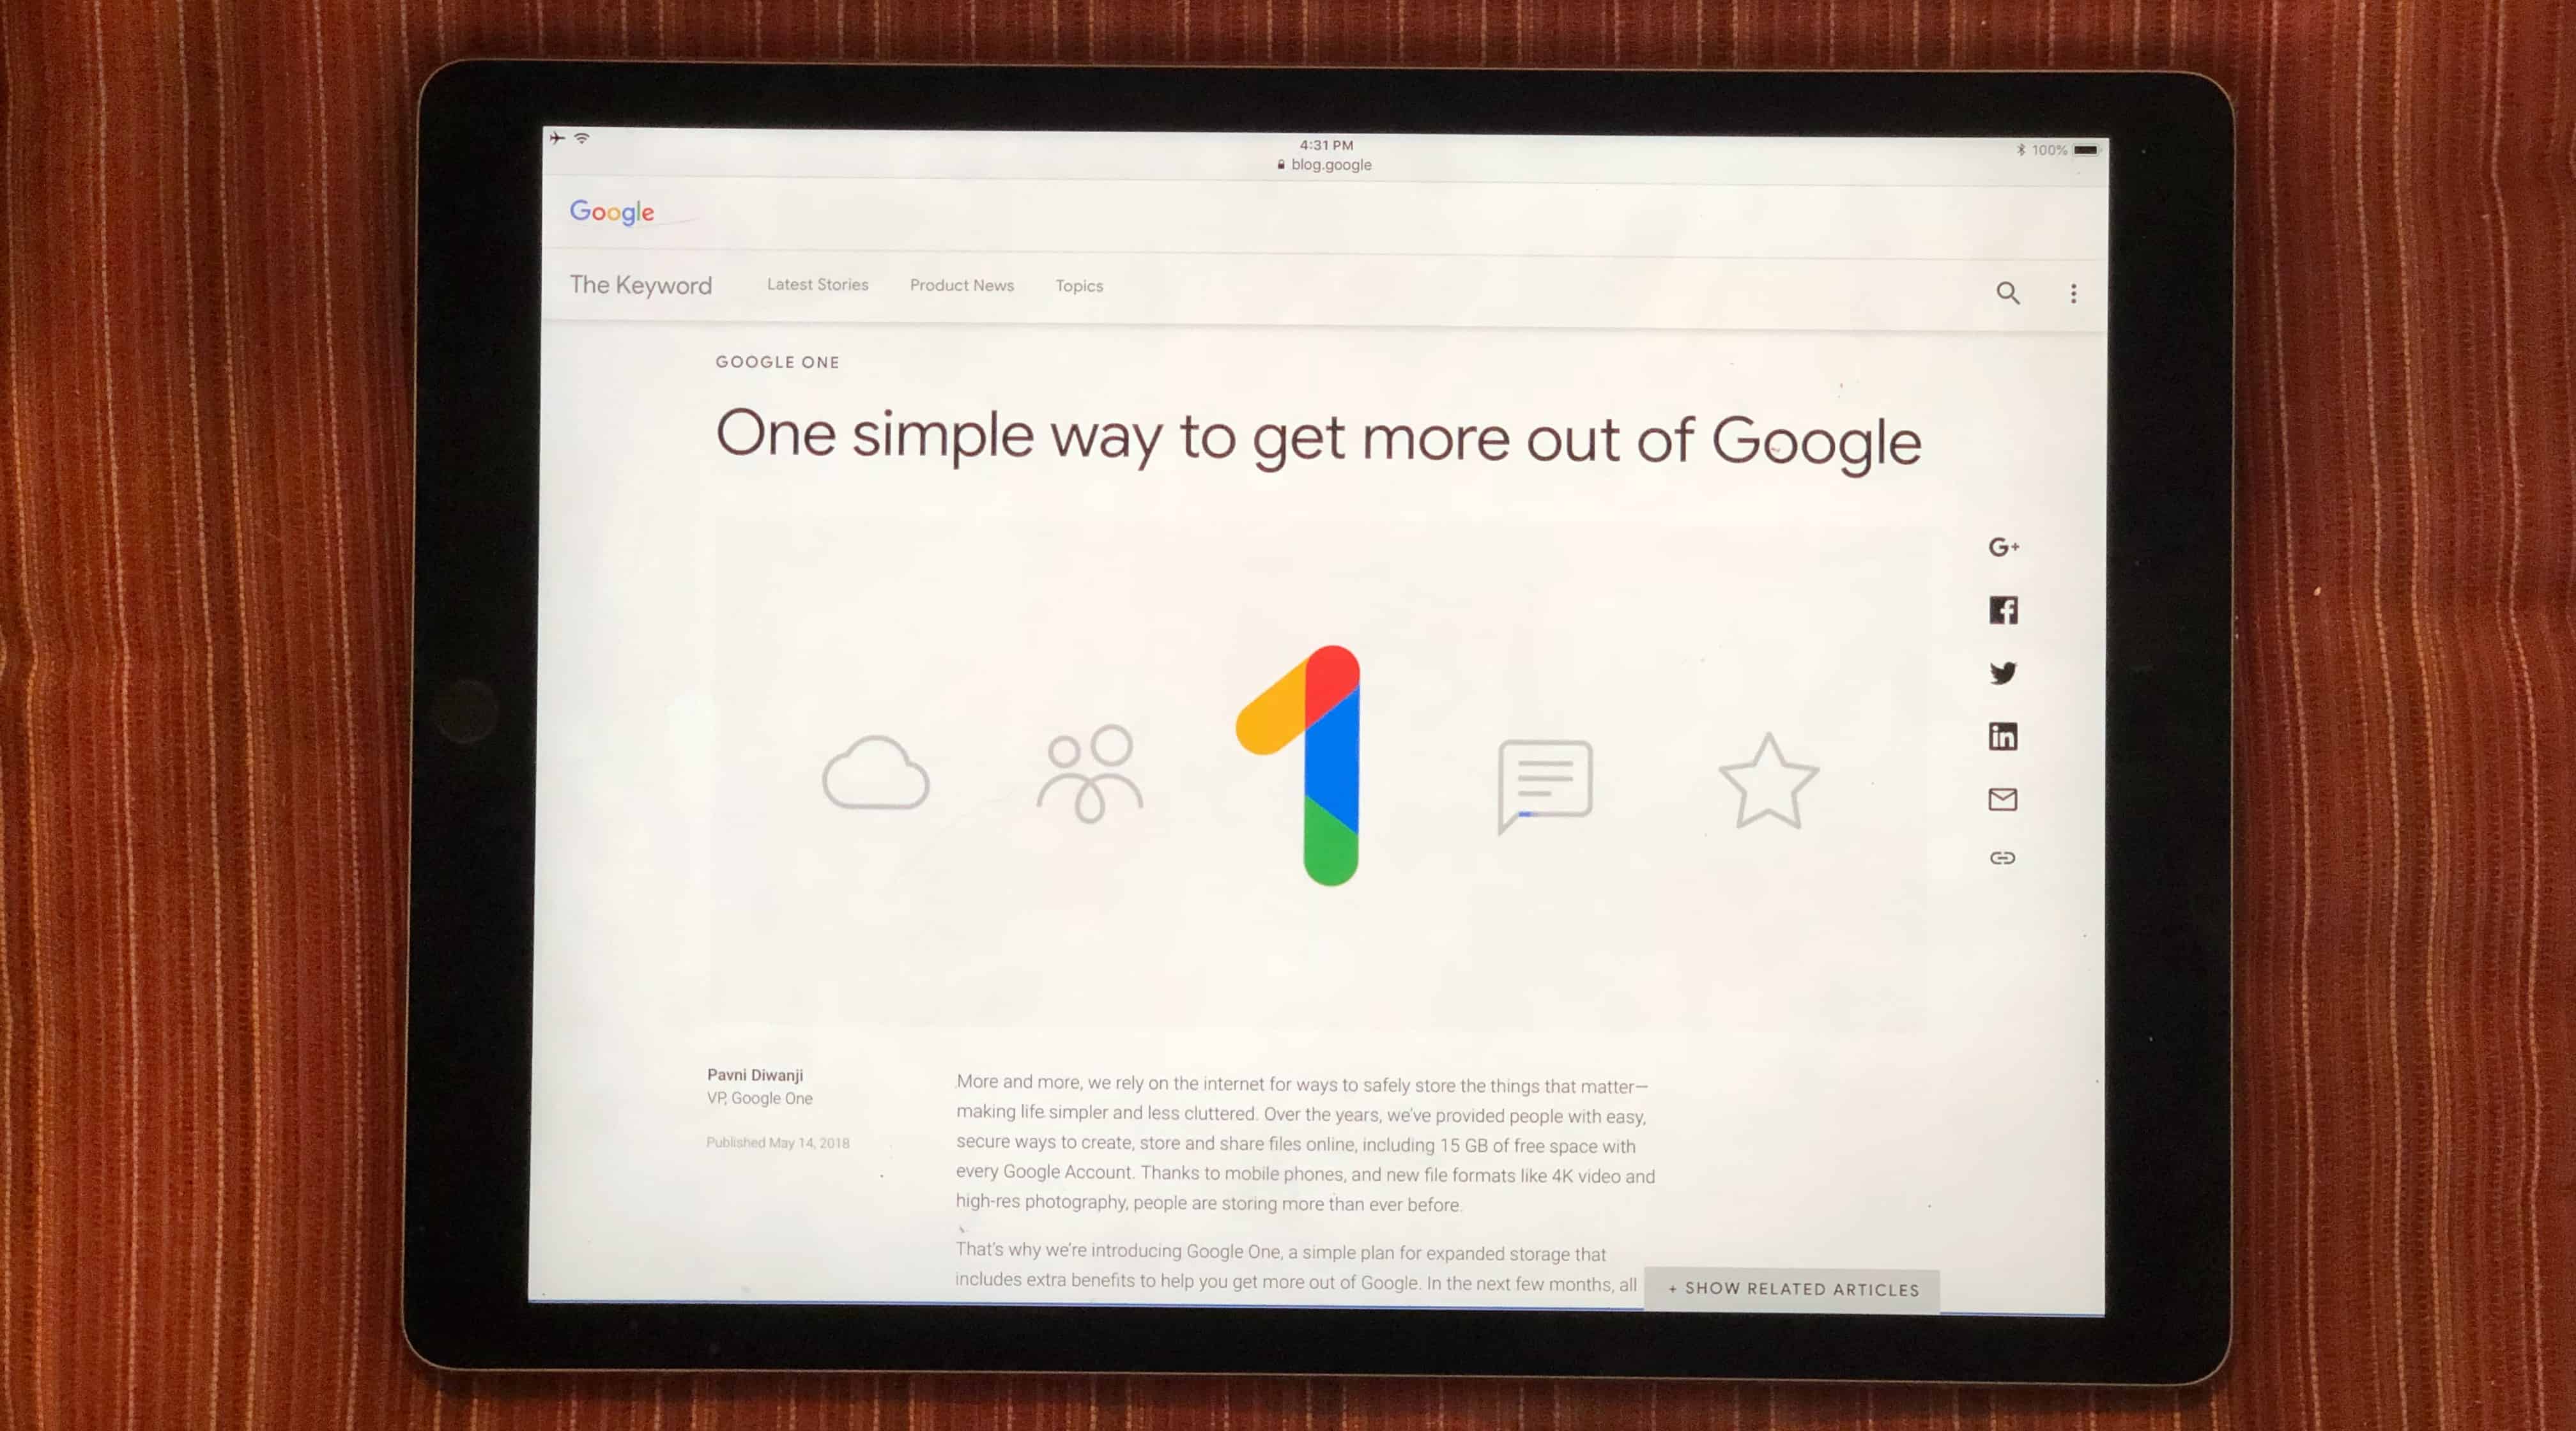 Google One is apparently going to replace Google Drive.